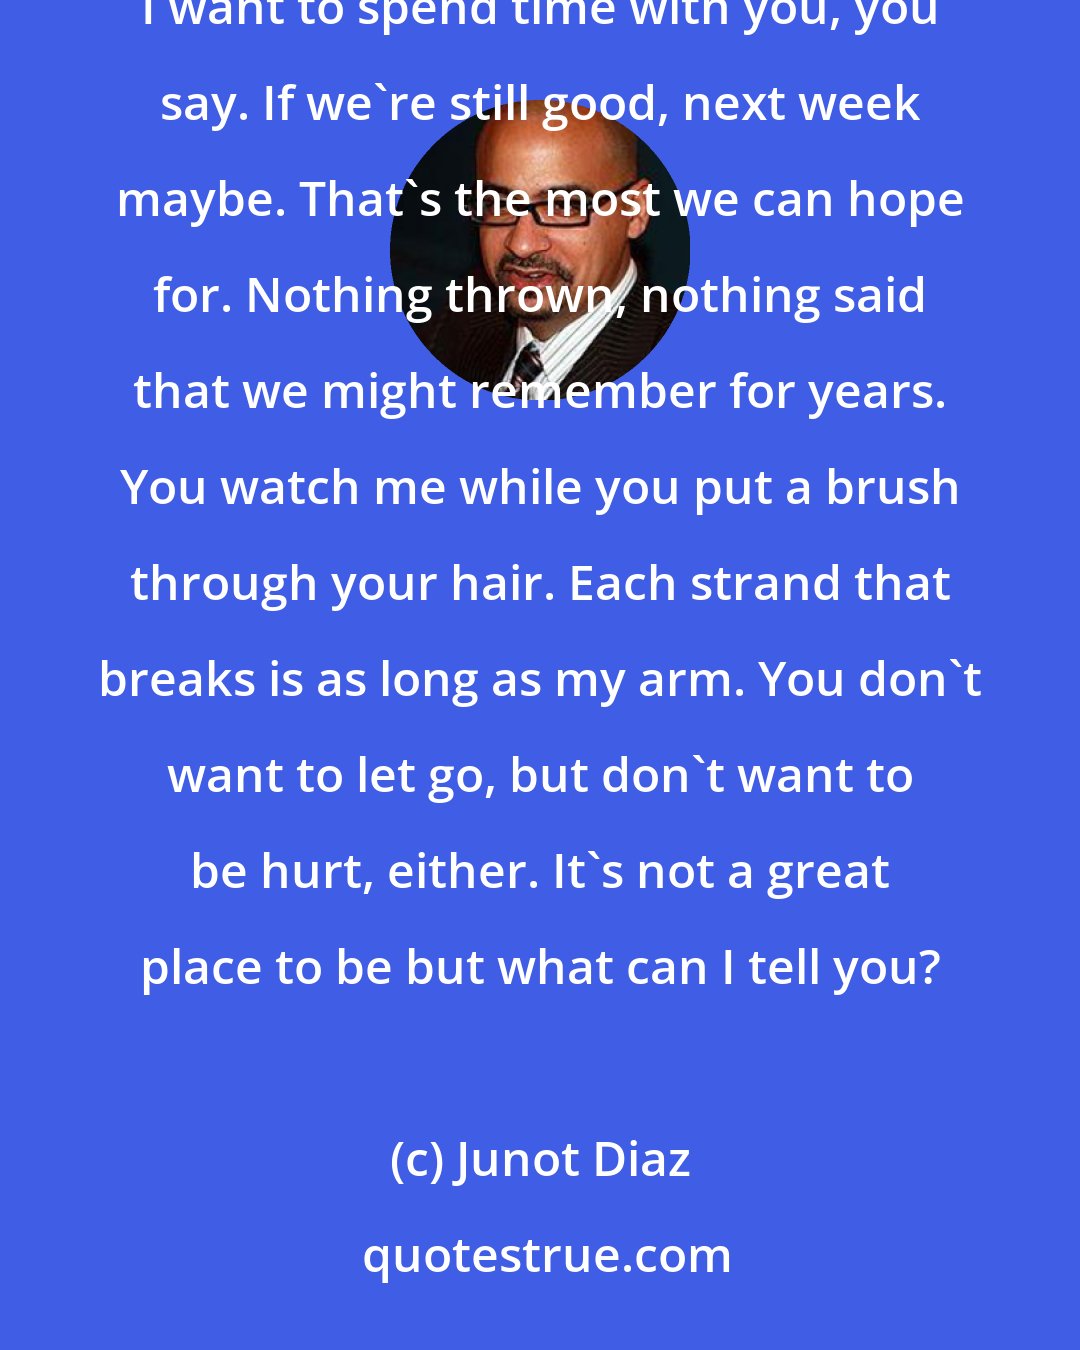 Junot Diaz: We're on speaking terms today. I say, Maybe we should hang out with the boys, and you shake your head. I want to spend time with you, you say. If we're still good, next week maybe. That's the most we can hope for. Nothing thrown, nothing said that we might remember for years. You watch me while you put a brush through your hair. Each strand that breaks is as long as my arm. You don't want to let go, but don't want to be hurt, either. It's not a great place to be but what can I tell you?